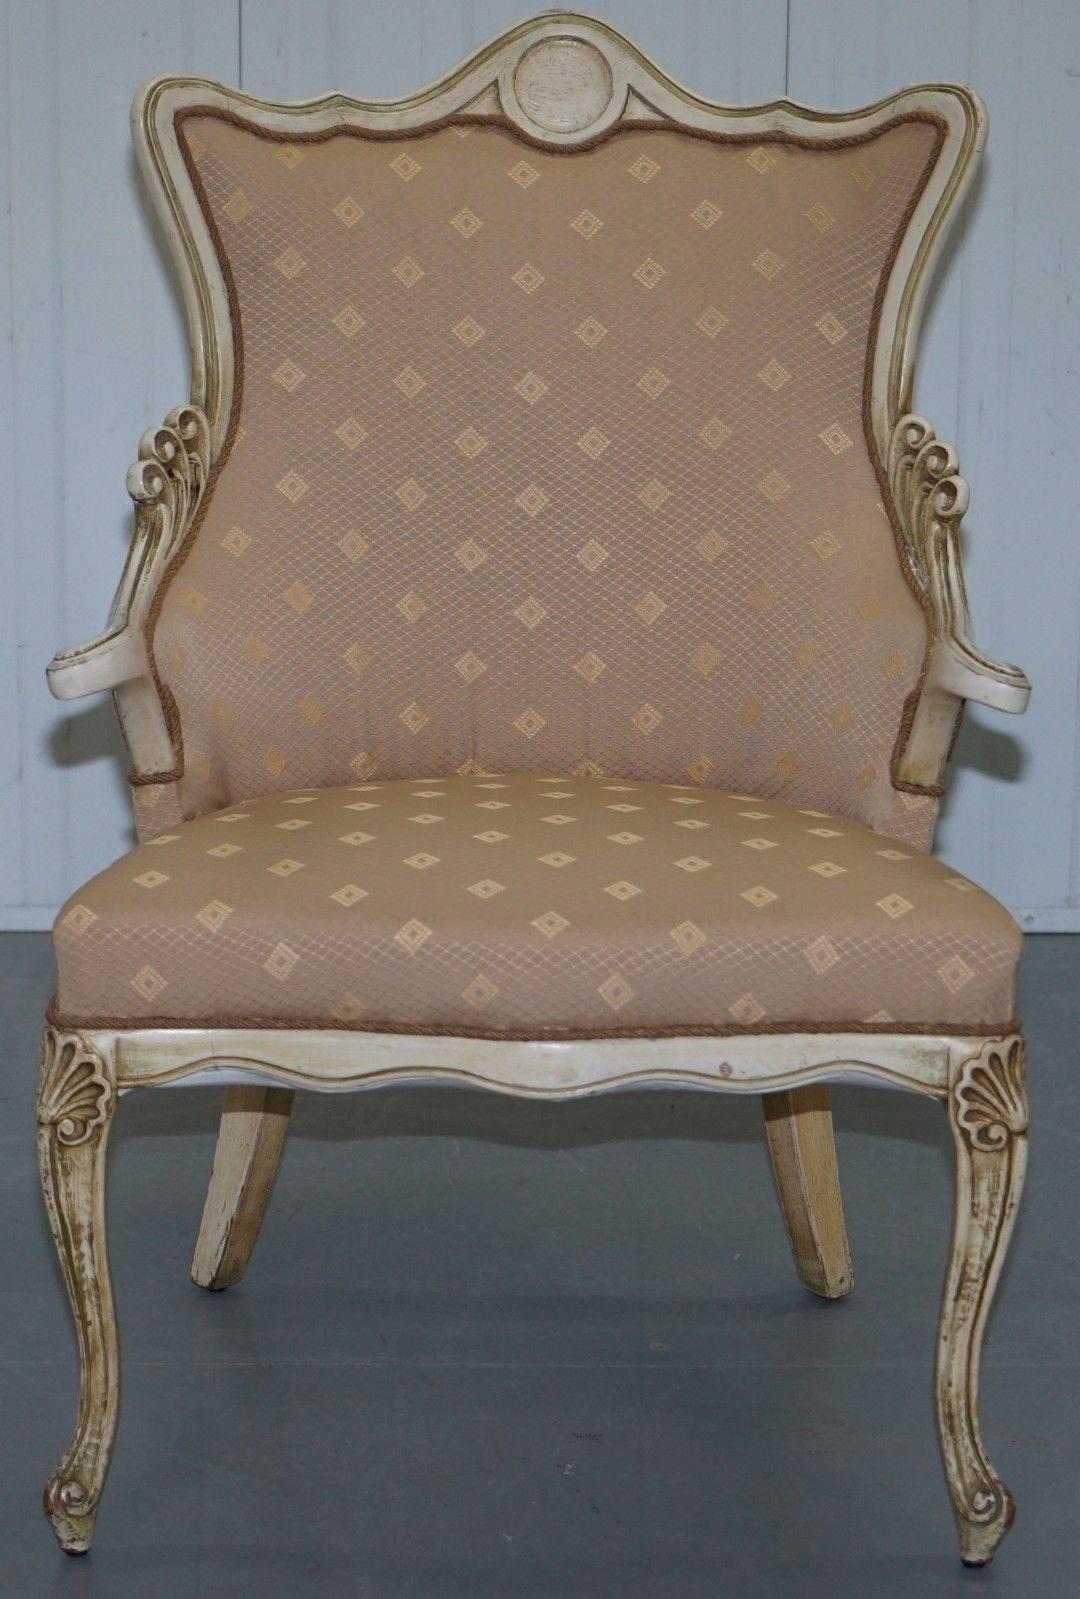 We are delighted to offer for sale this lovely late 19th century French Louis occasional armchair

A lovely looking and sculpted piece, I purchased this from north east Holland and it was listed as an late 19th century piece made in the Manor of a